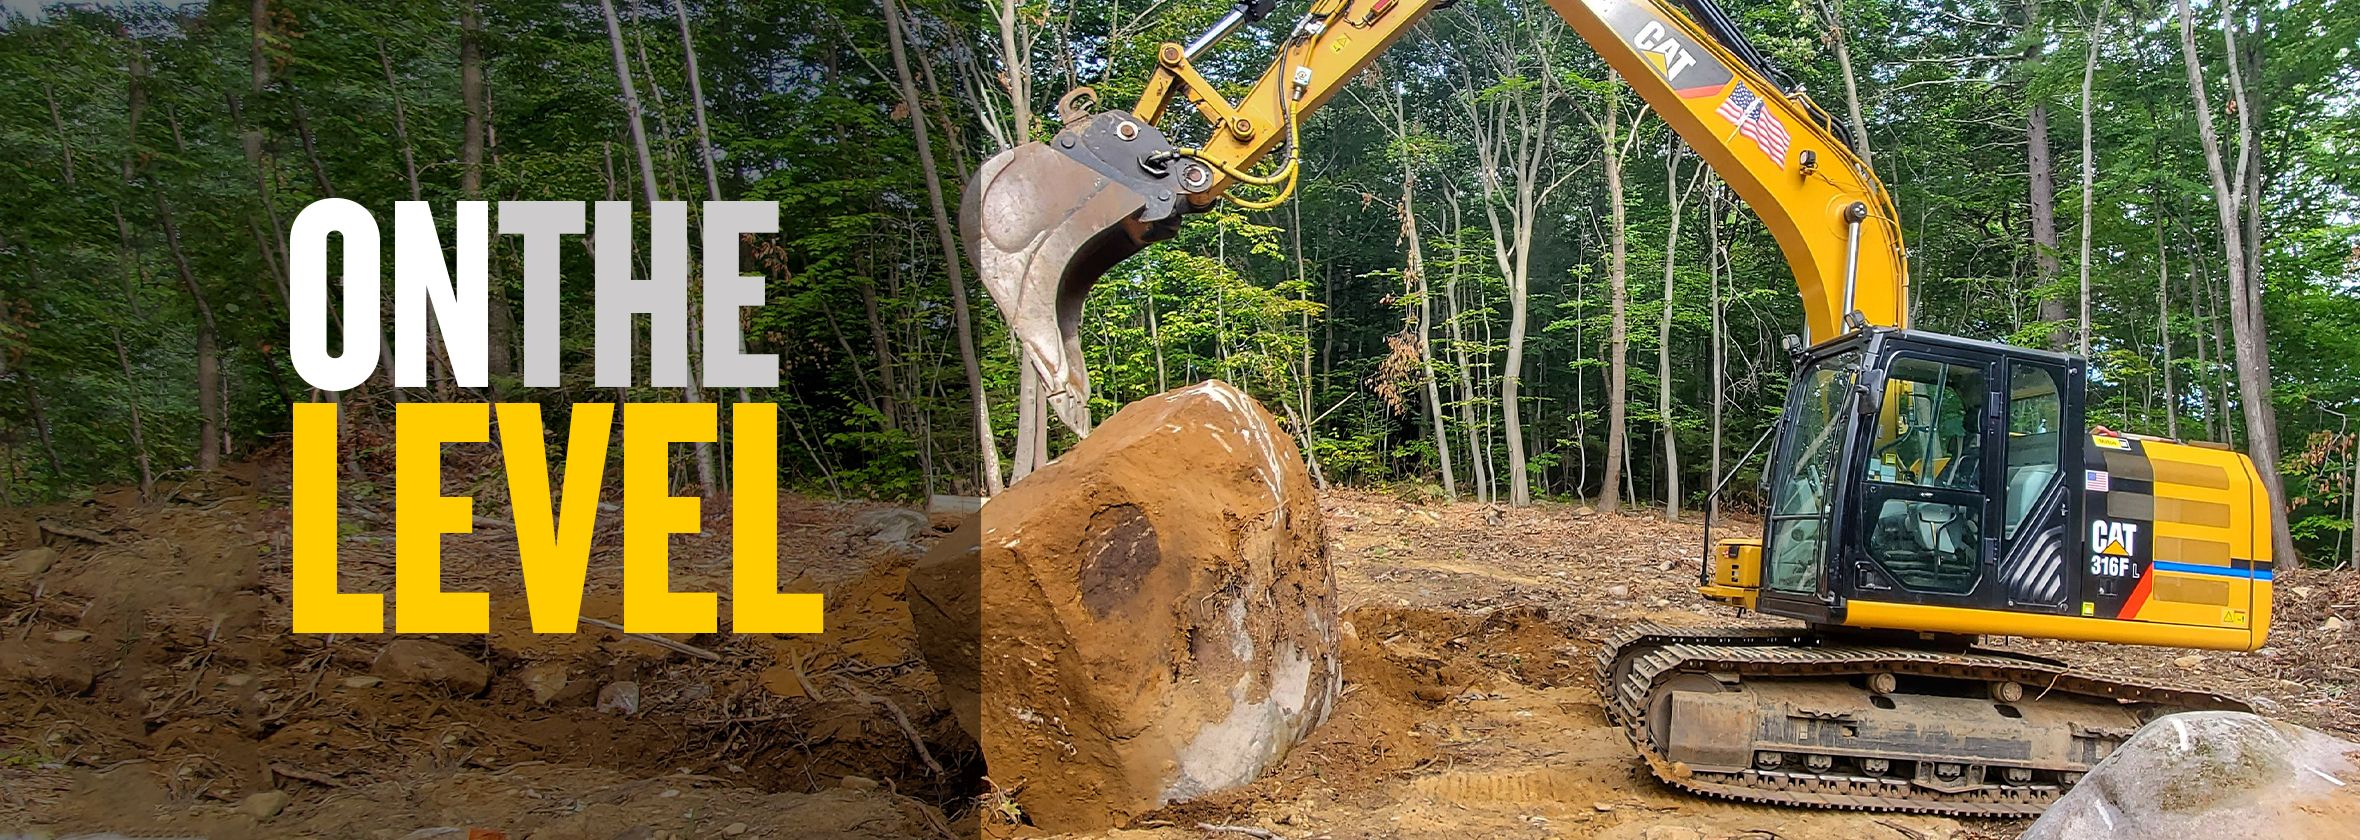 The Top 5 Construction Attachments for Excavating, Cat